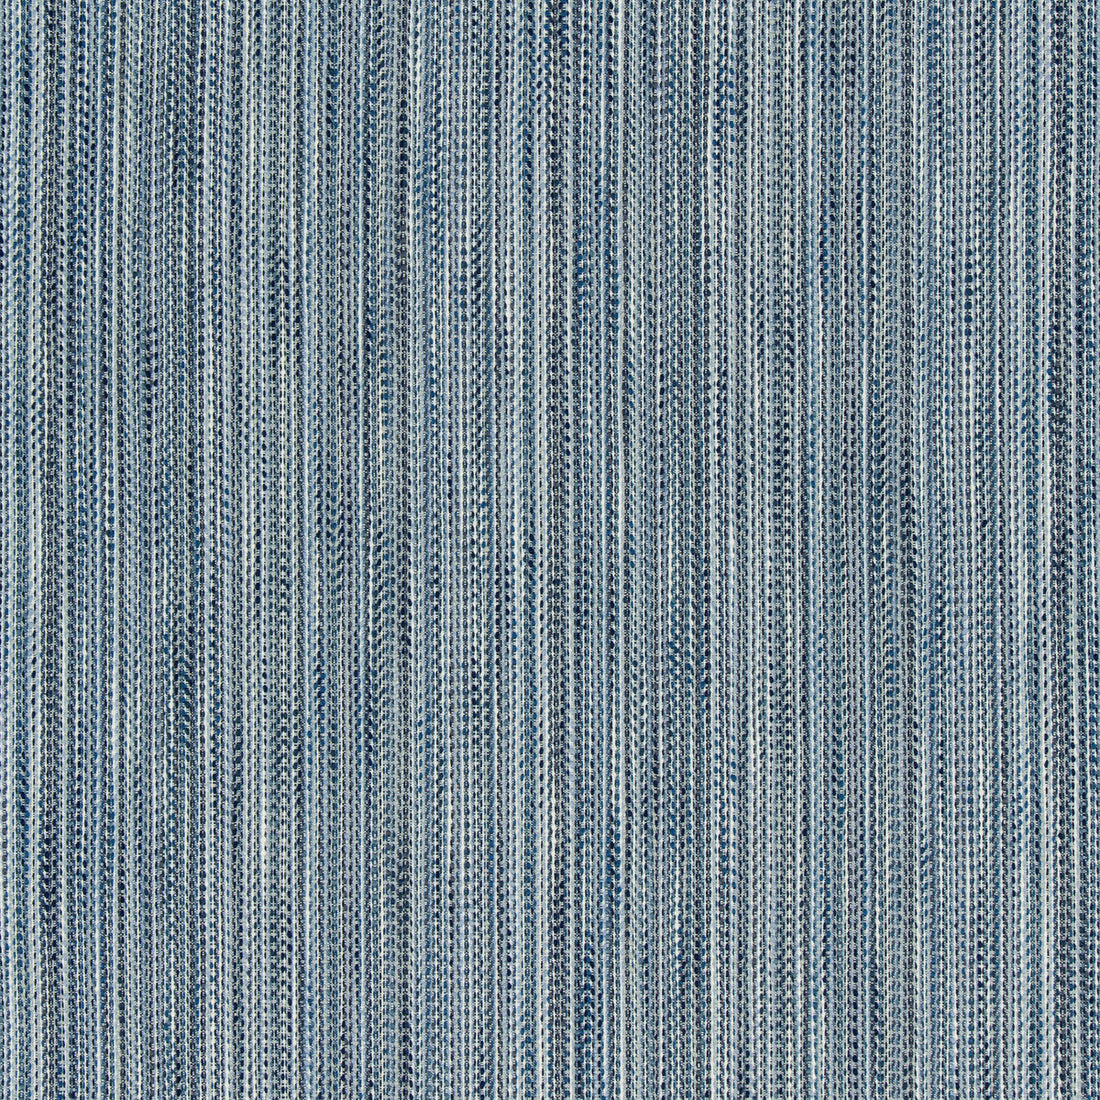 Kravet Design fabric in 36077-51 color - pattern 36077.51.0 - by Kravet Design in the Inside Out Performance Fabrics collection